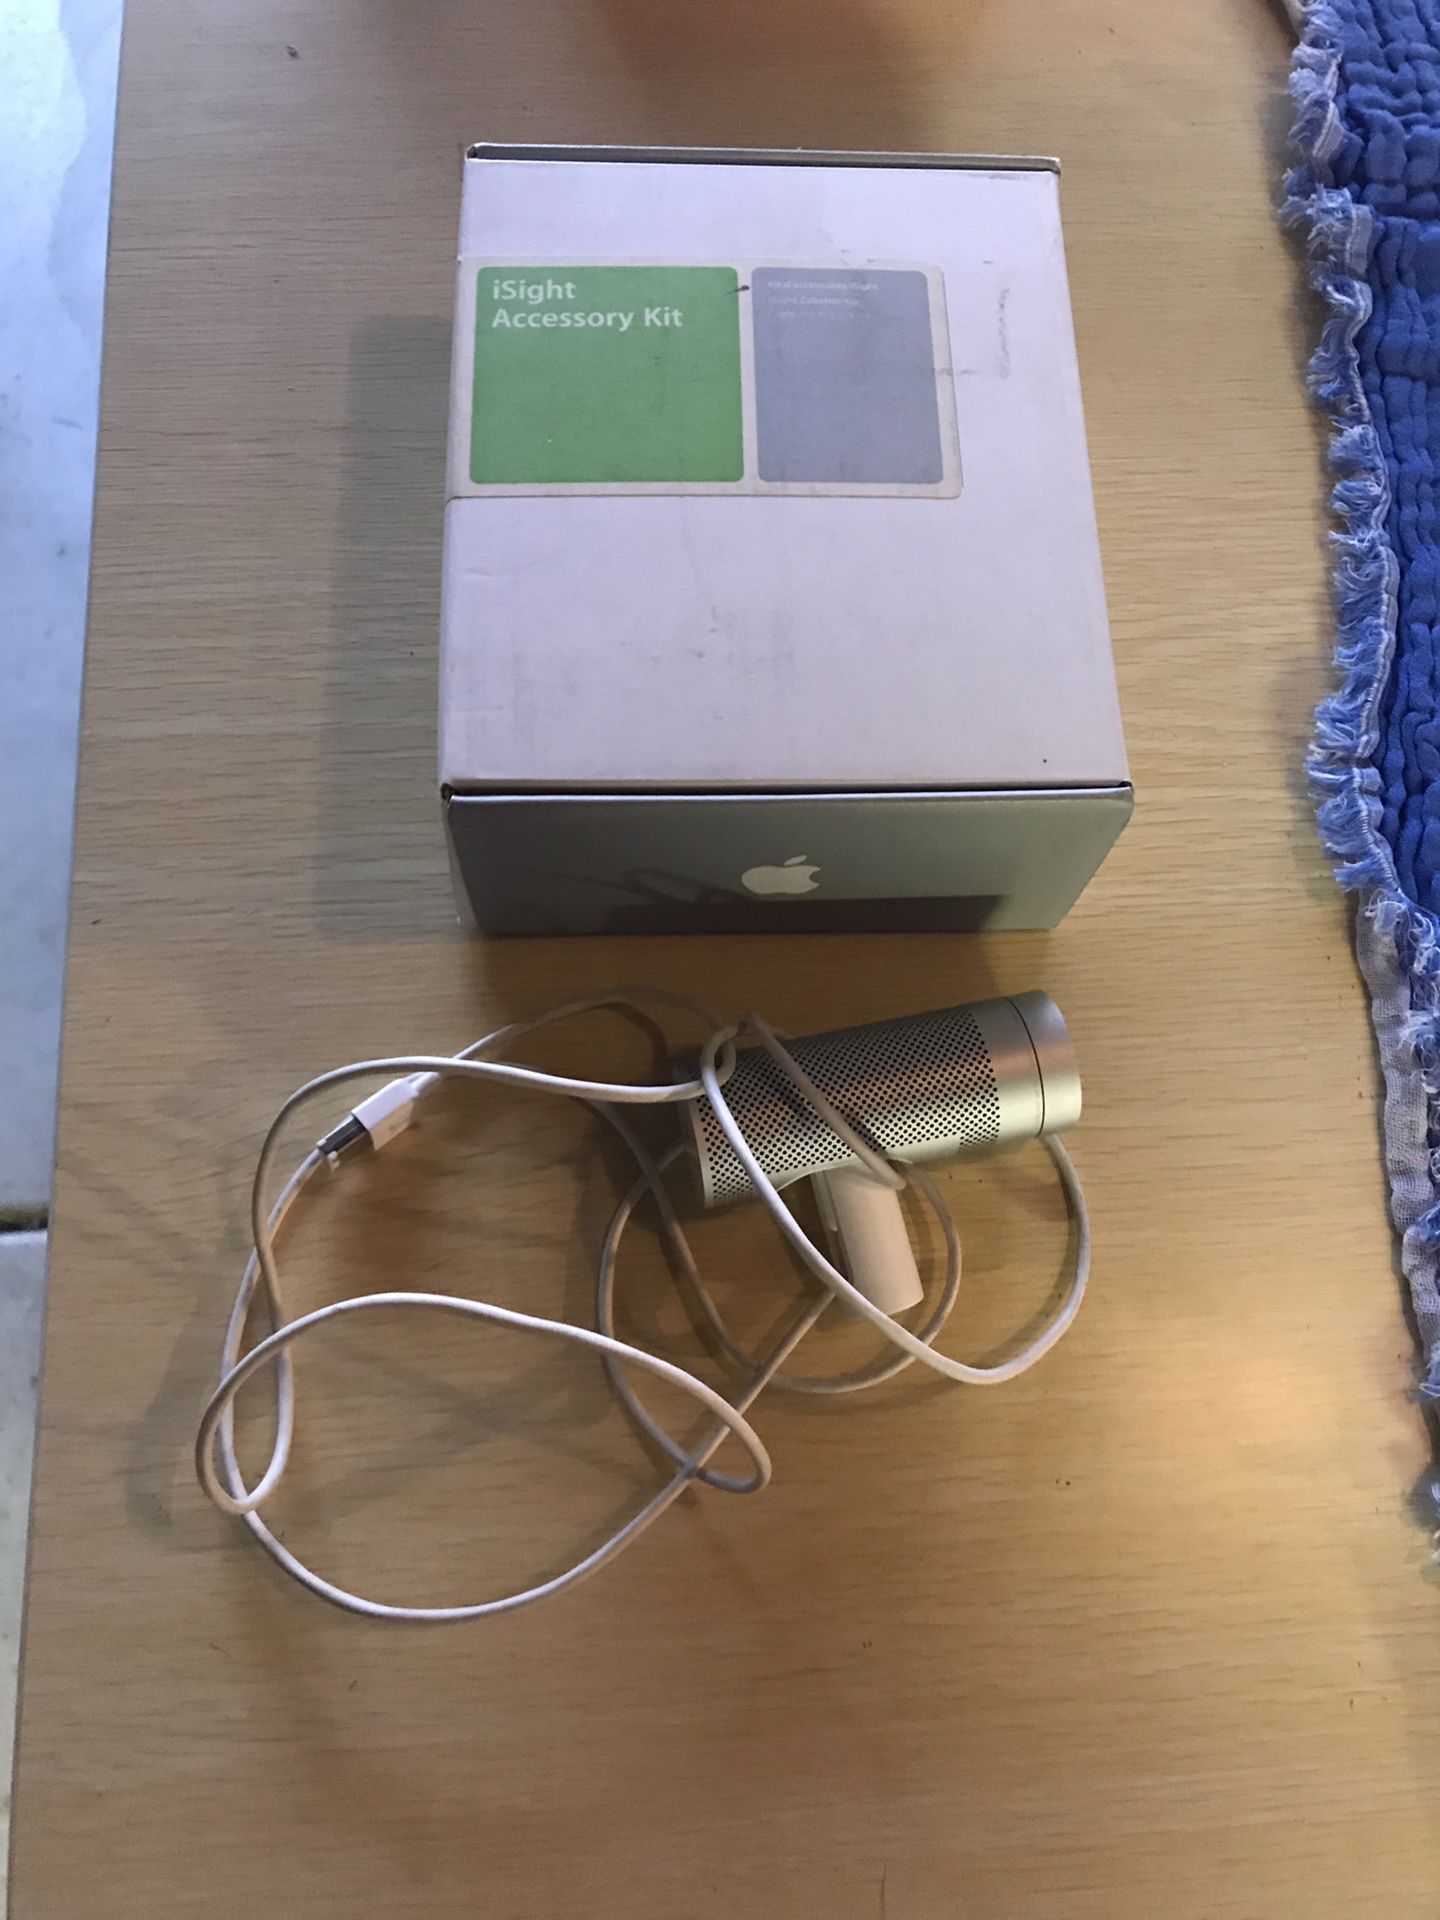 Apple iSight Camera and Microphone